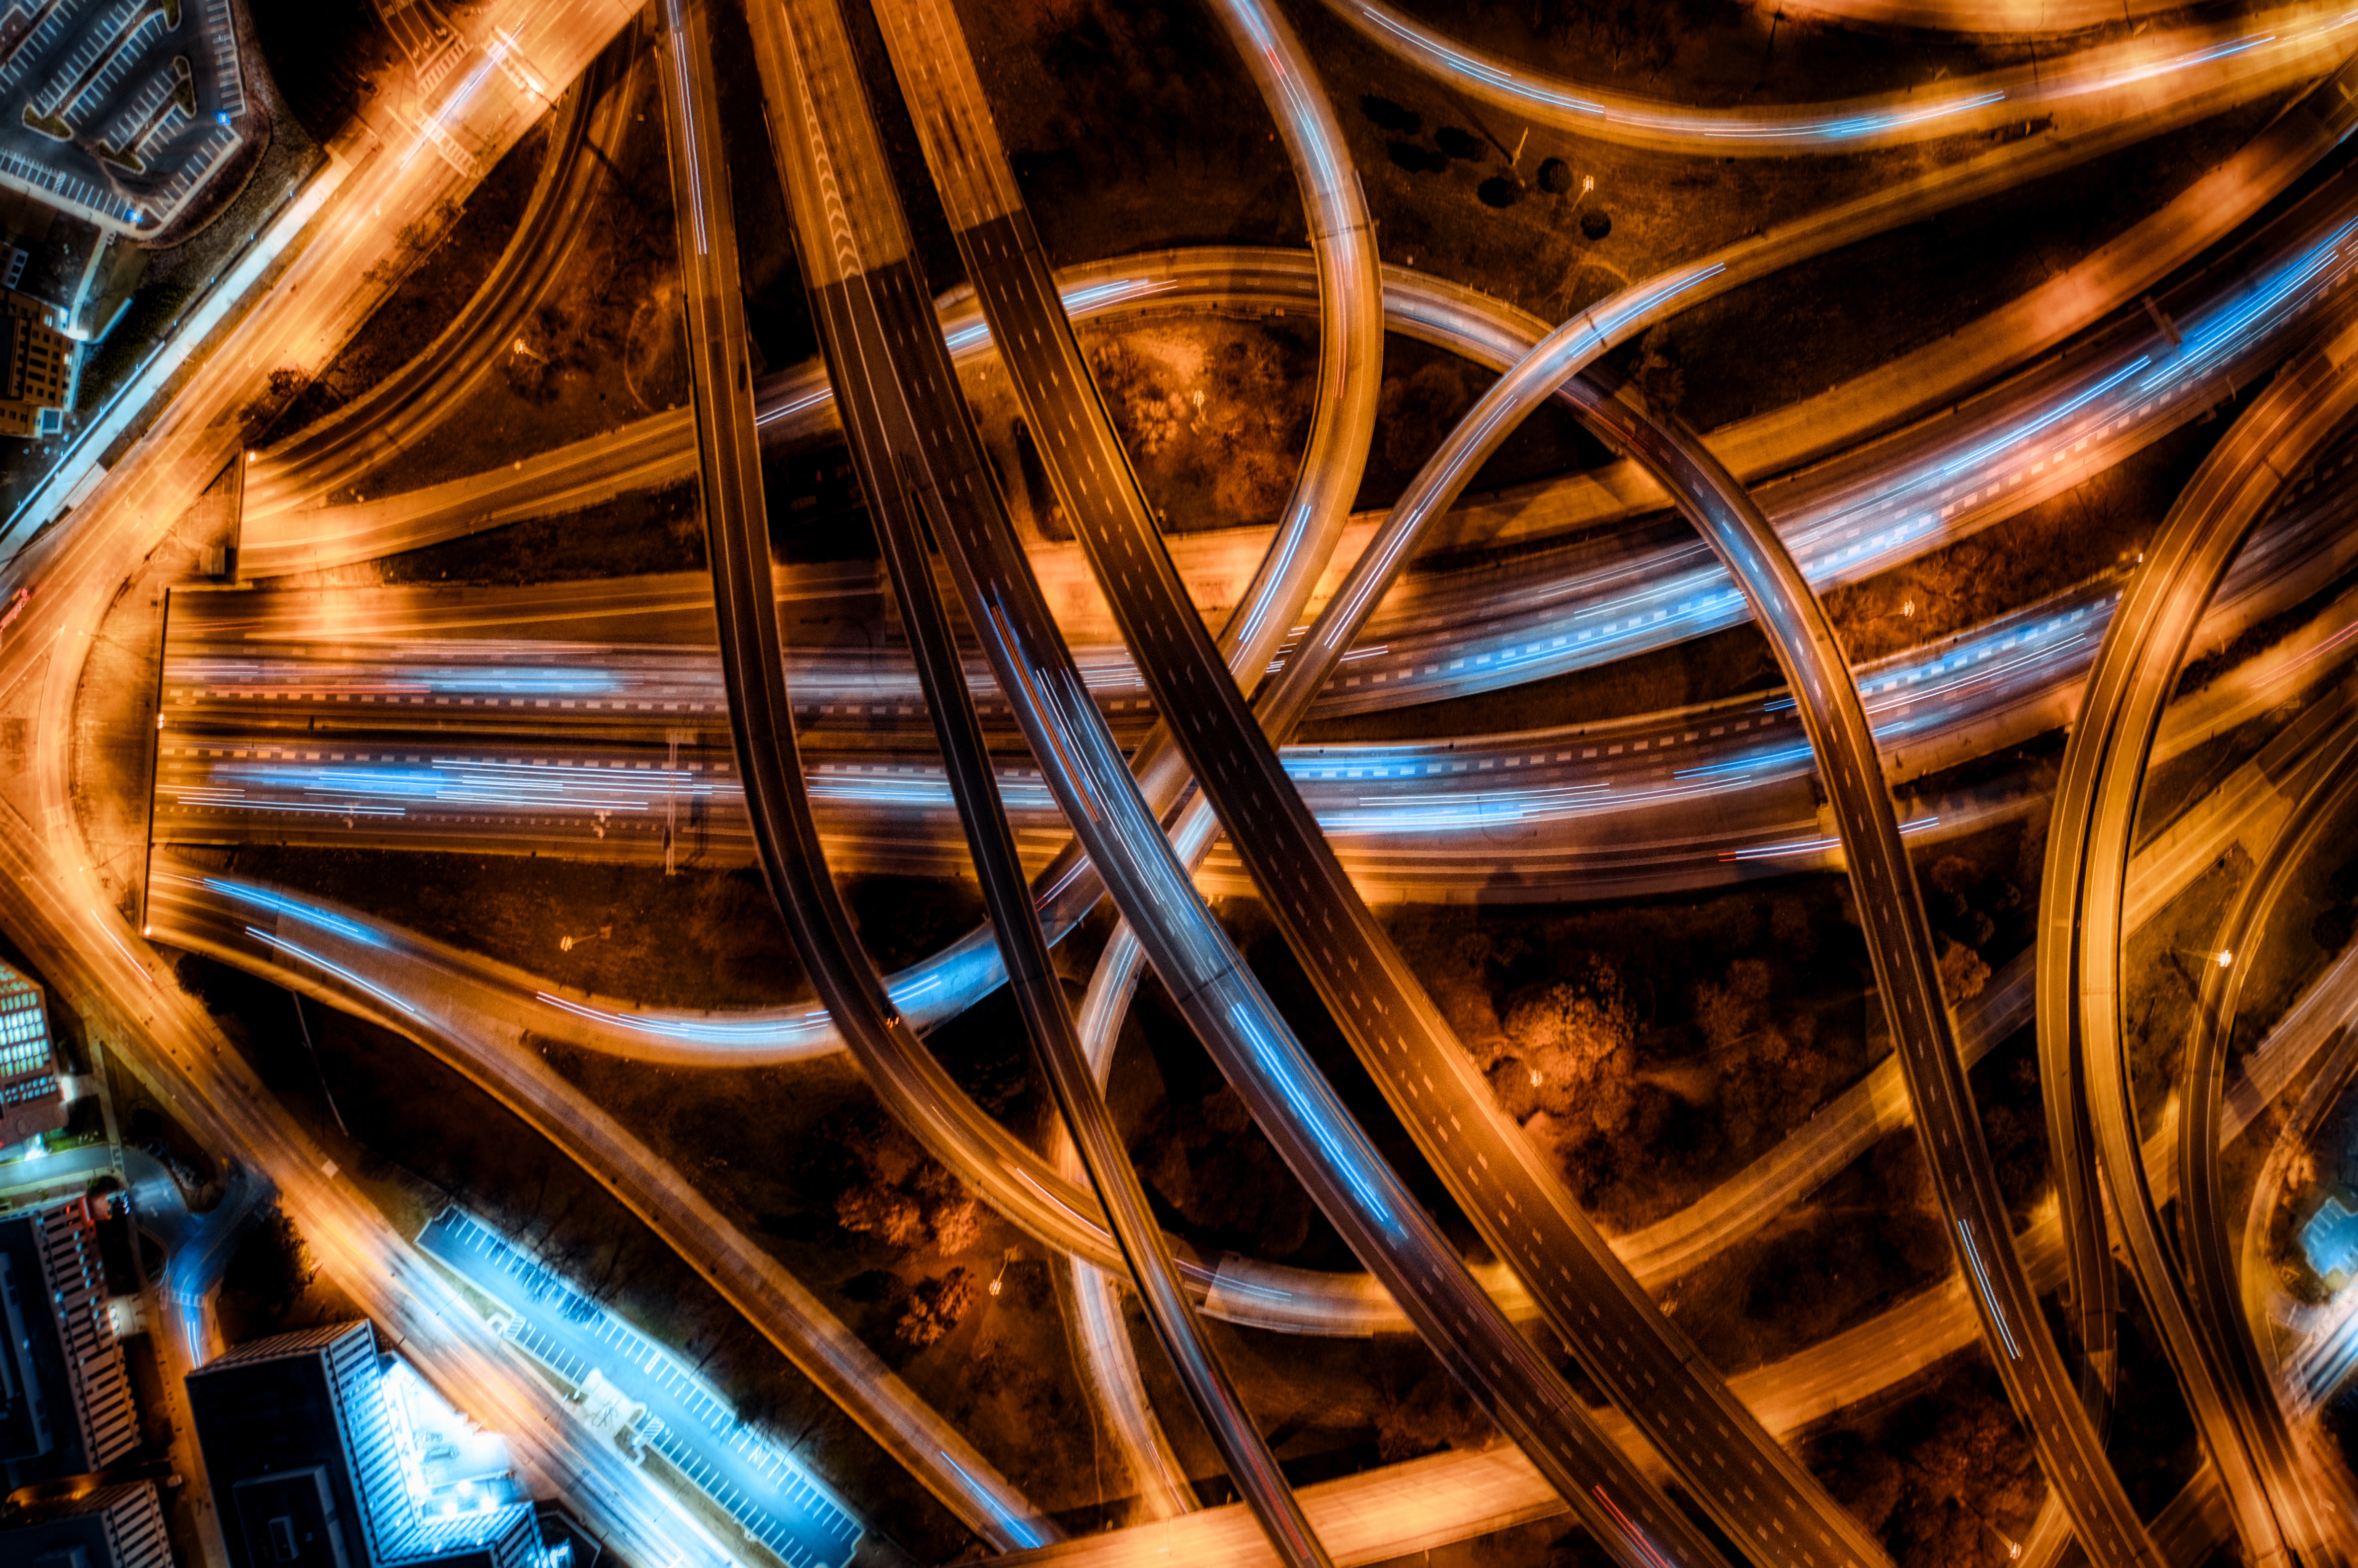 roads, miscellanea, view from above, miscellaneous, backlight, illumination, confused, intricate, interchange, denouement